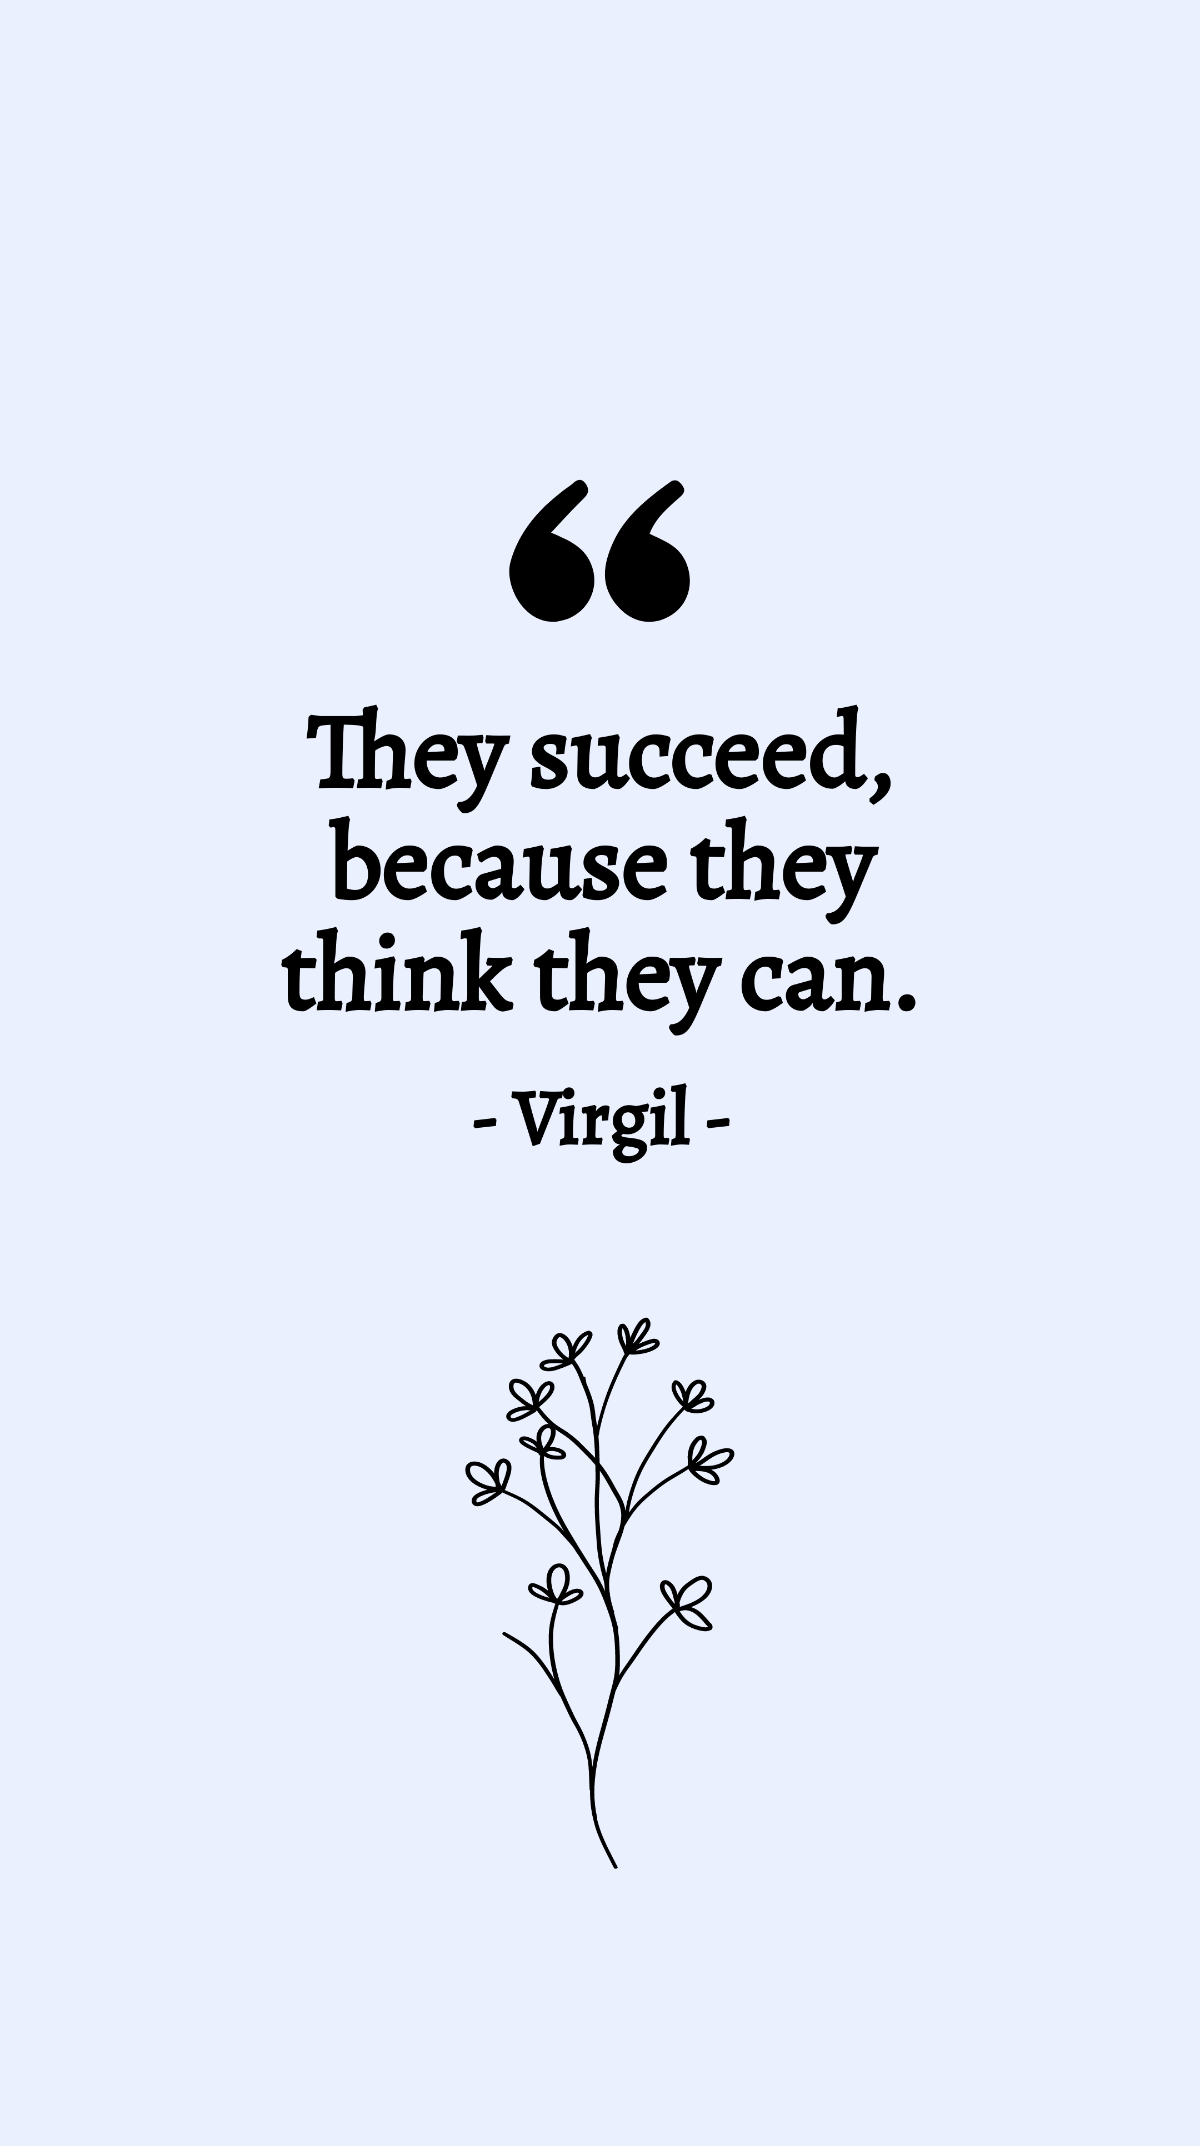 Virgil - They succeed, because they think they can. Template